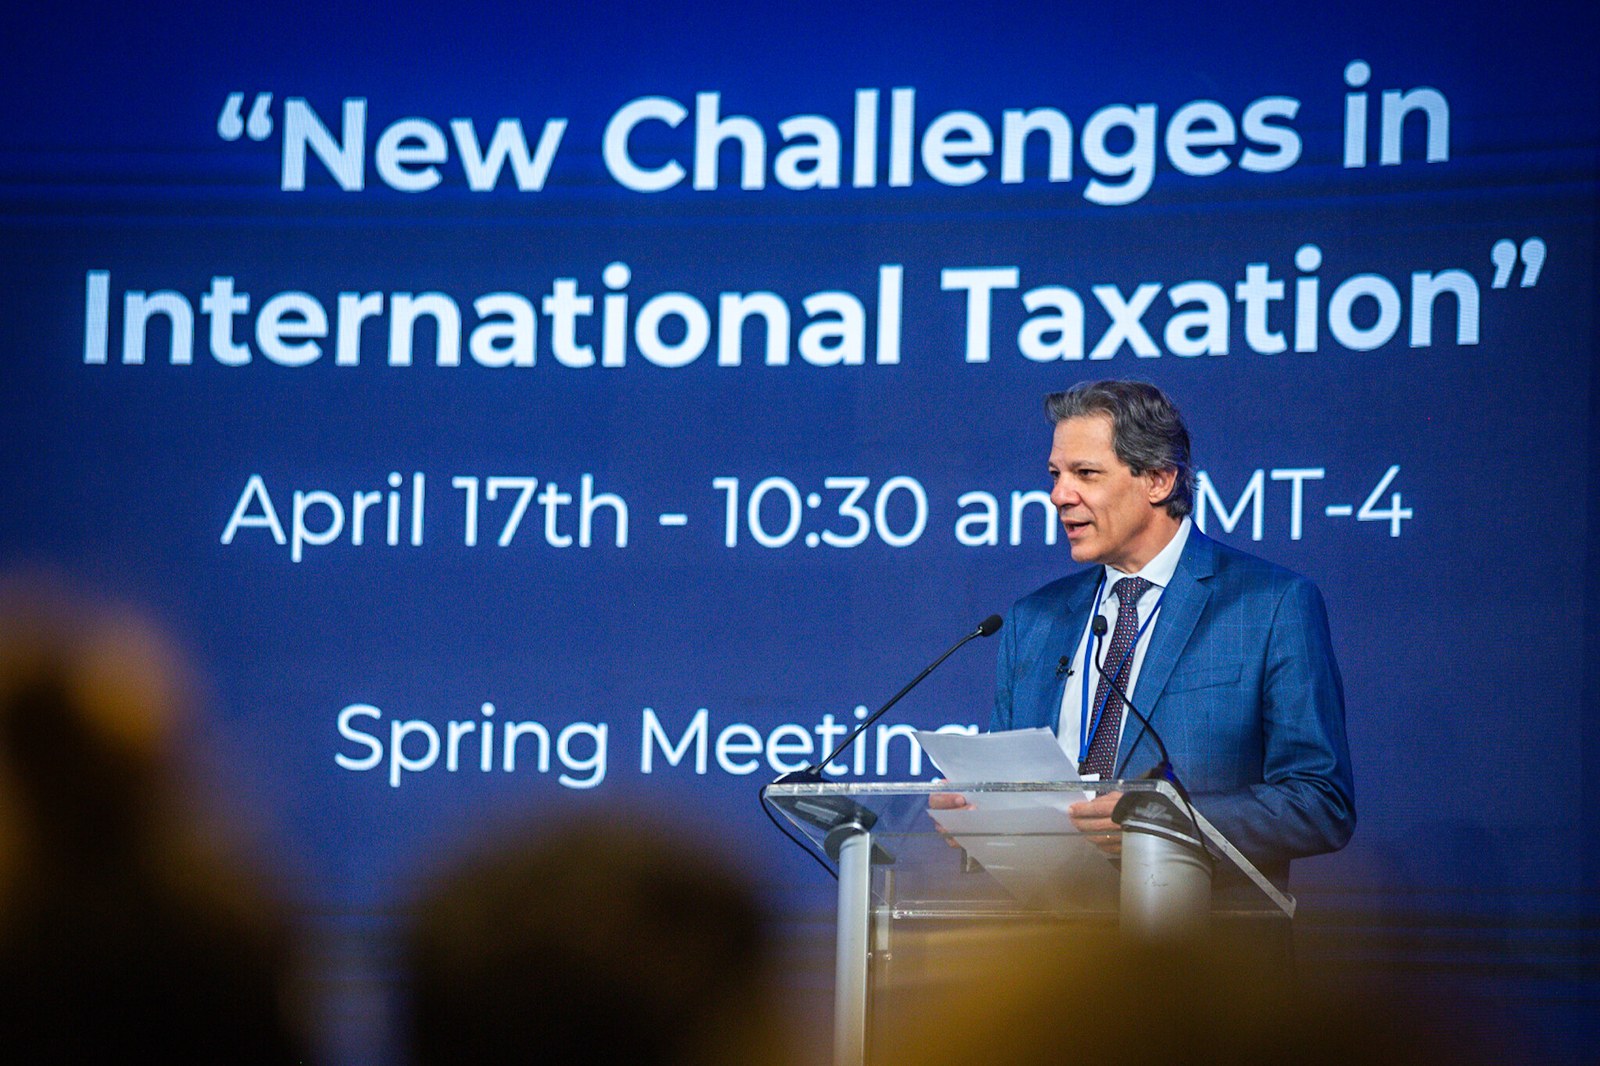 "International taxation is not only the favorite topic of progressive economists, but a fundamental concern that lies at the heart of the global macroeconomic issue," said Haddad.